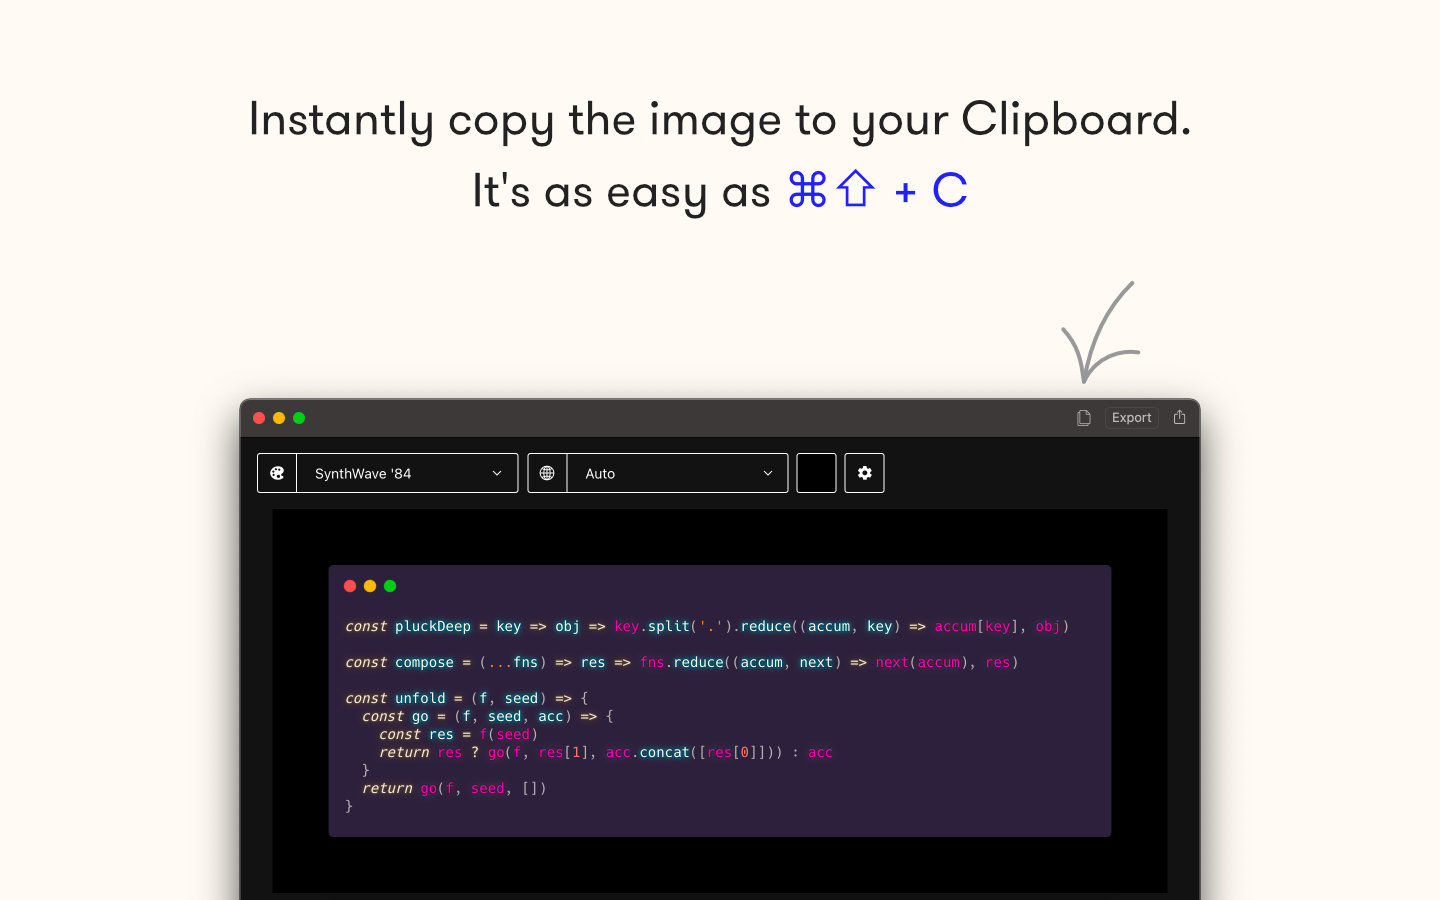 App Store image showing a screenshot of the main window with caption: Instantly copy the image to your Clipboard.